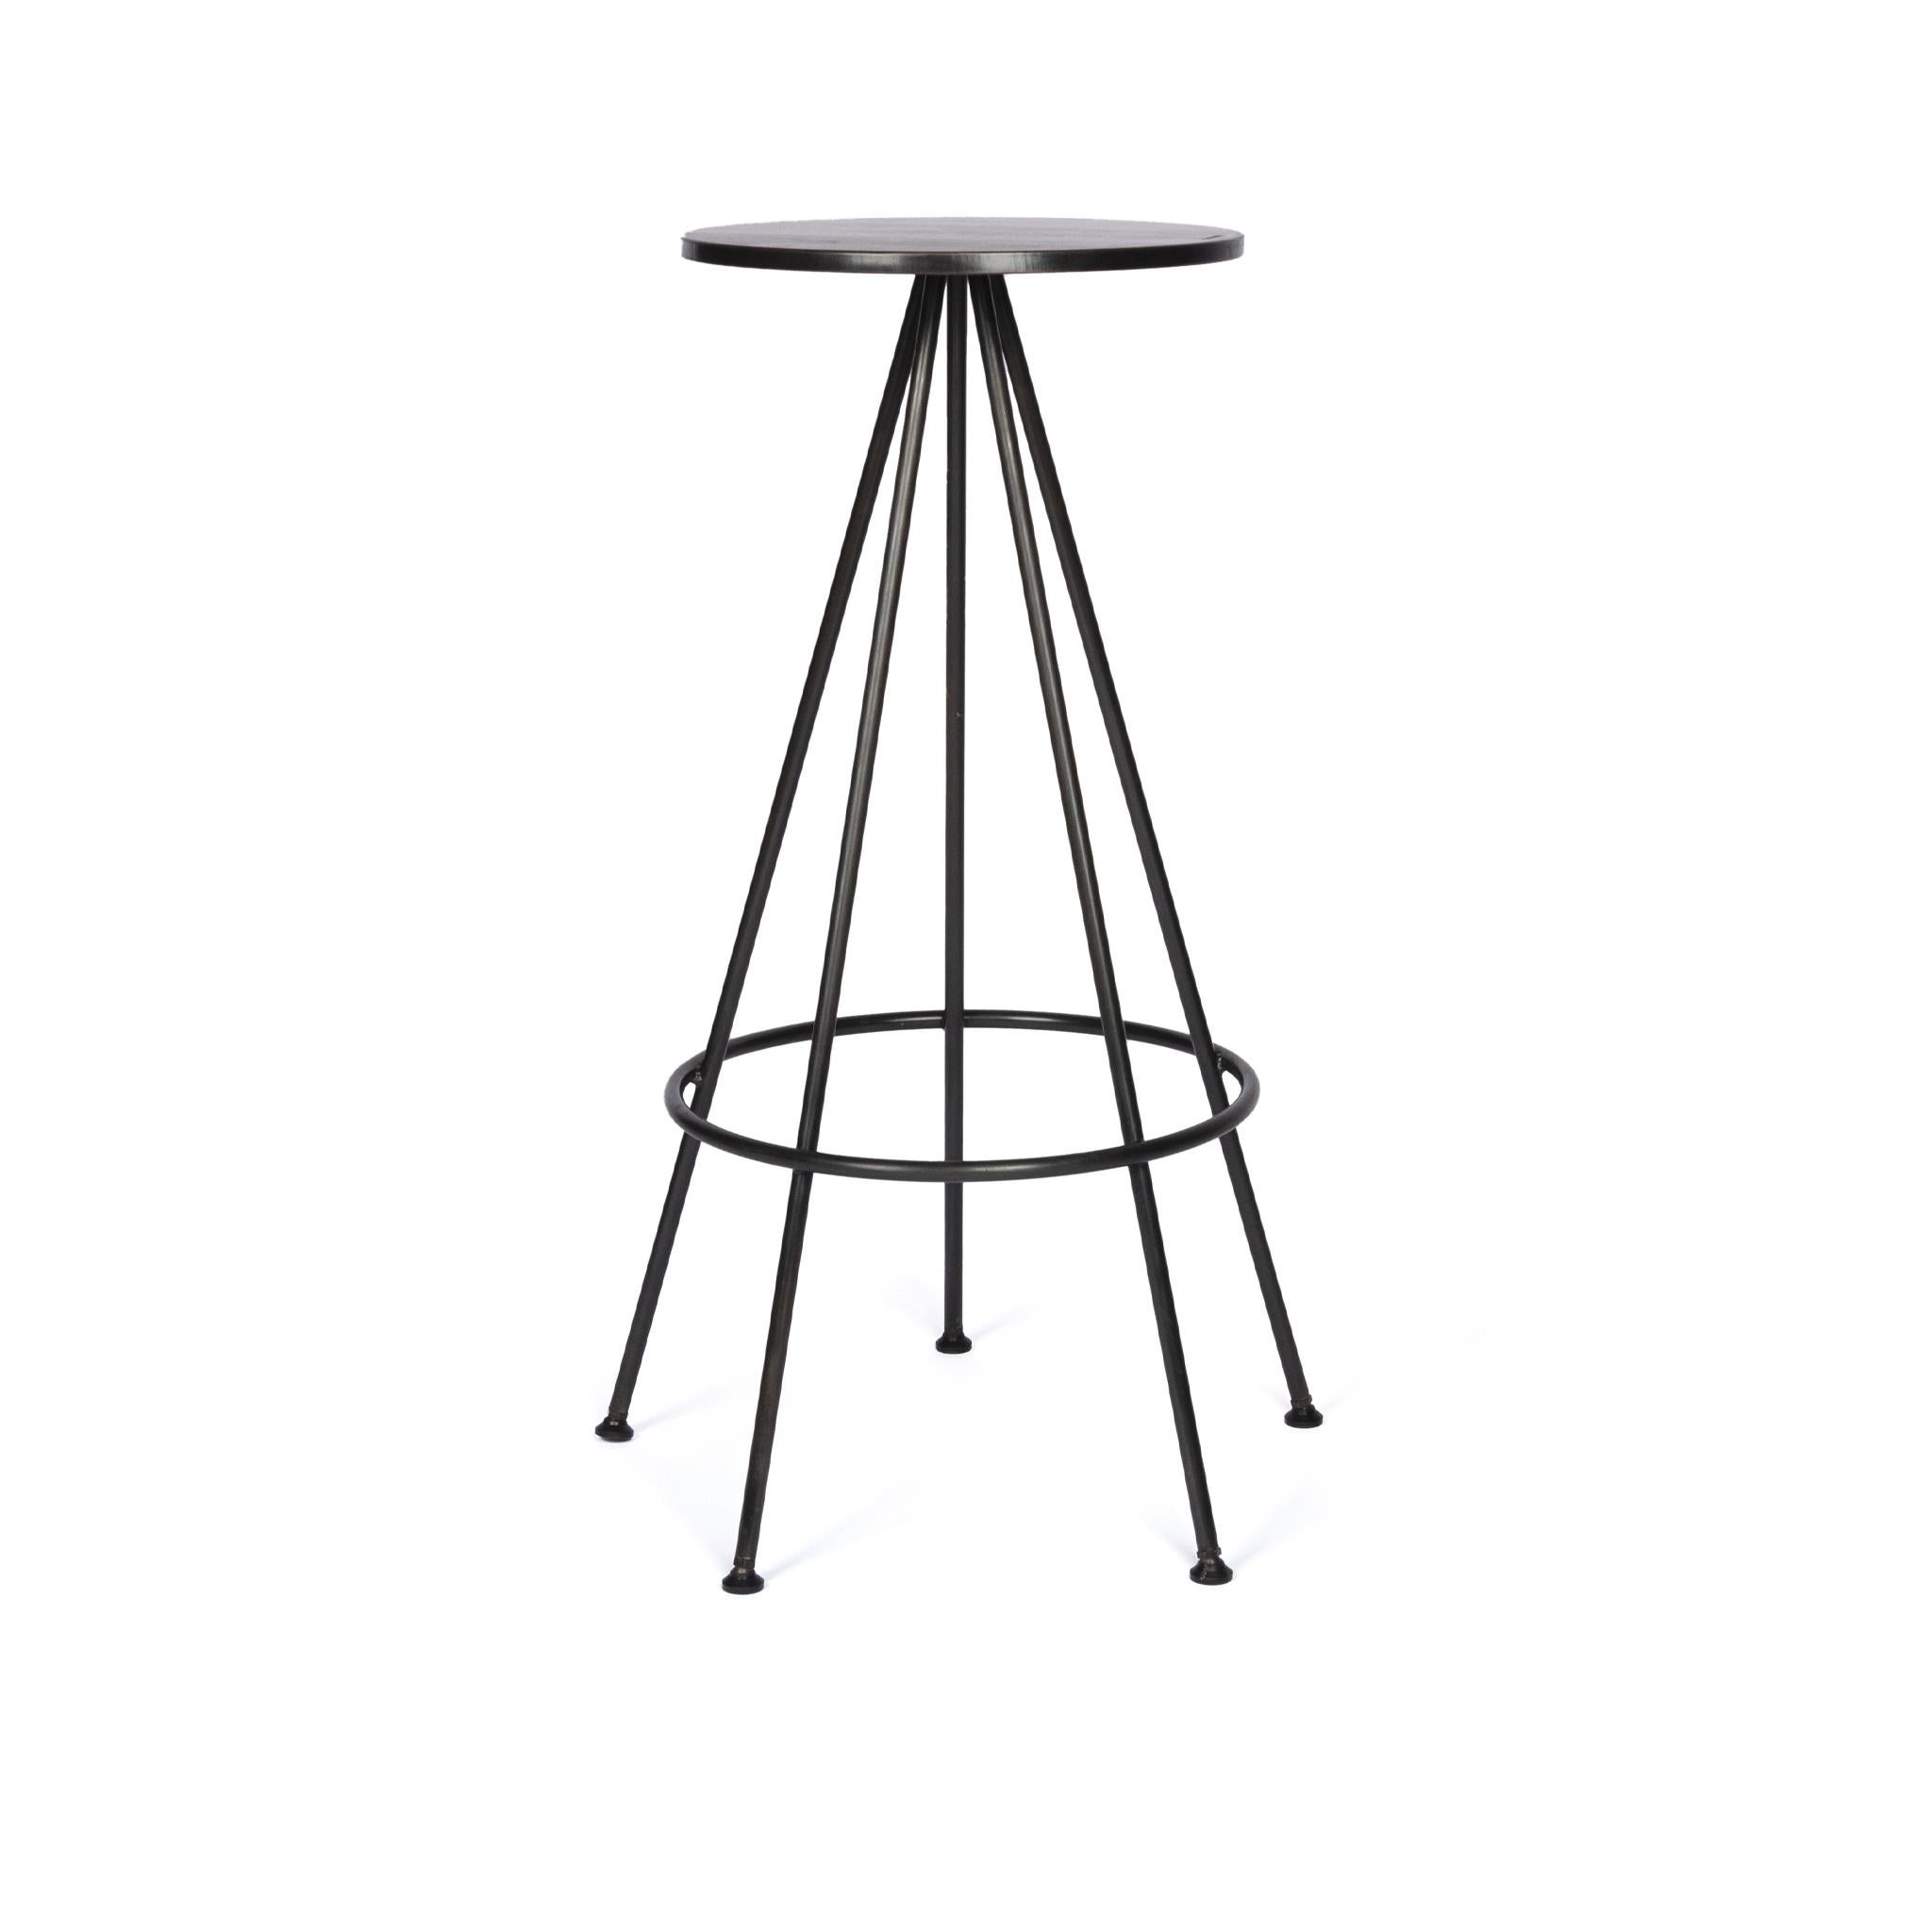 This simple urban industrial, sturdy bar stool is composed of five round bar legs and a robust steel seat. It's backless design makes it easy to store under counter tops. Each one is hand crafted and finished in a contemporary blackened finish and